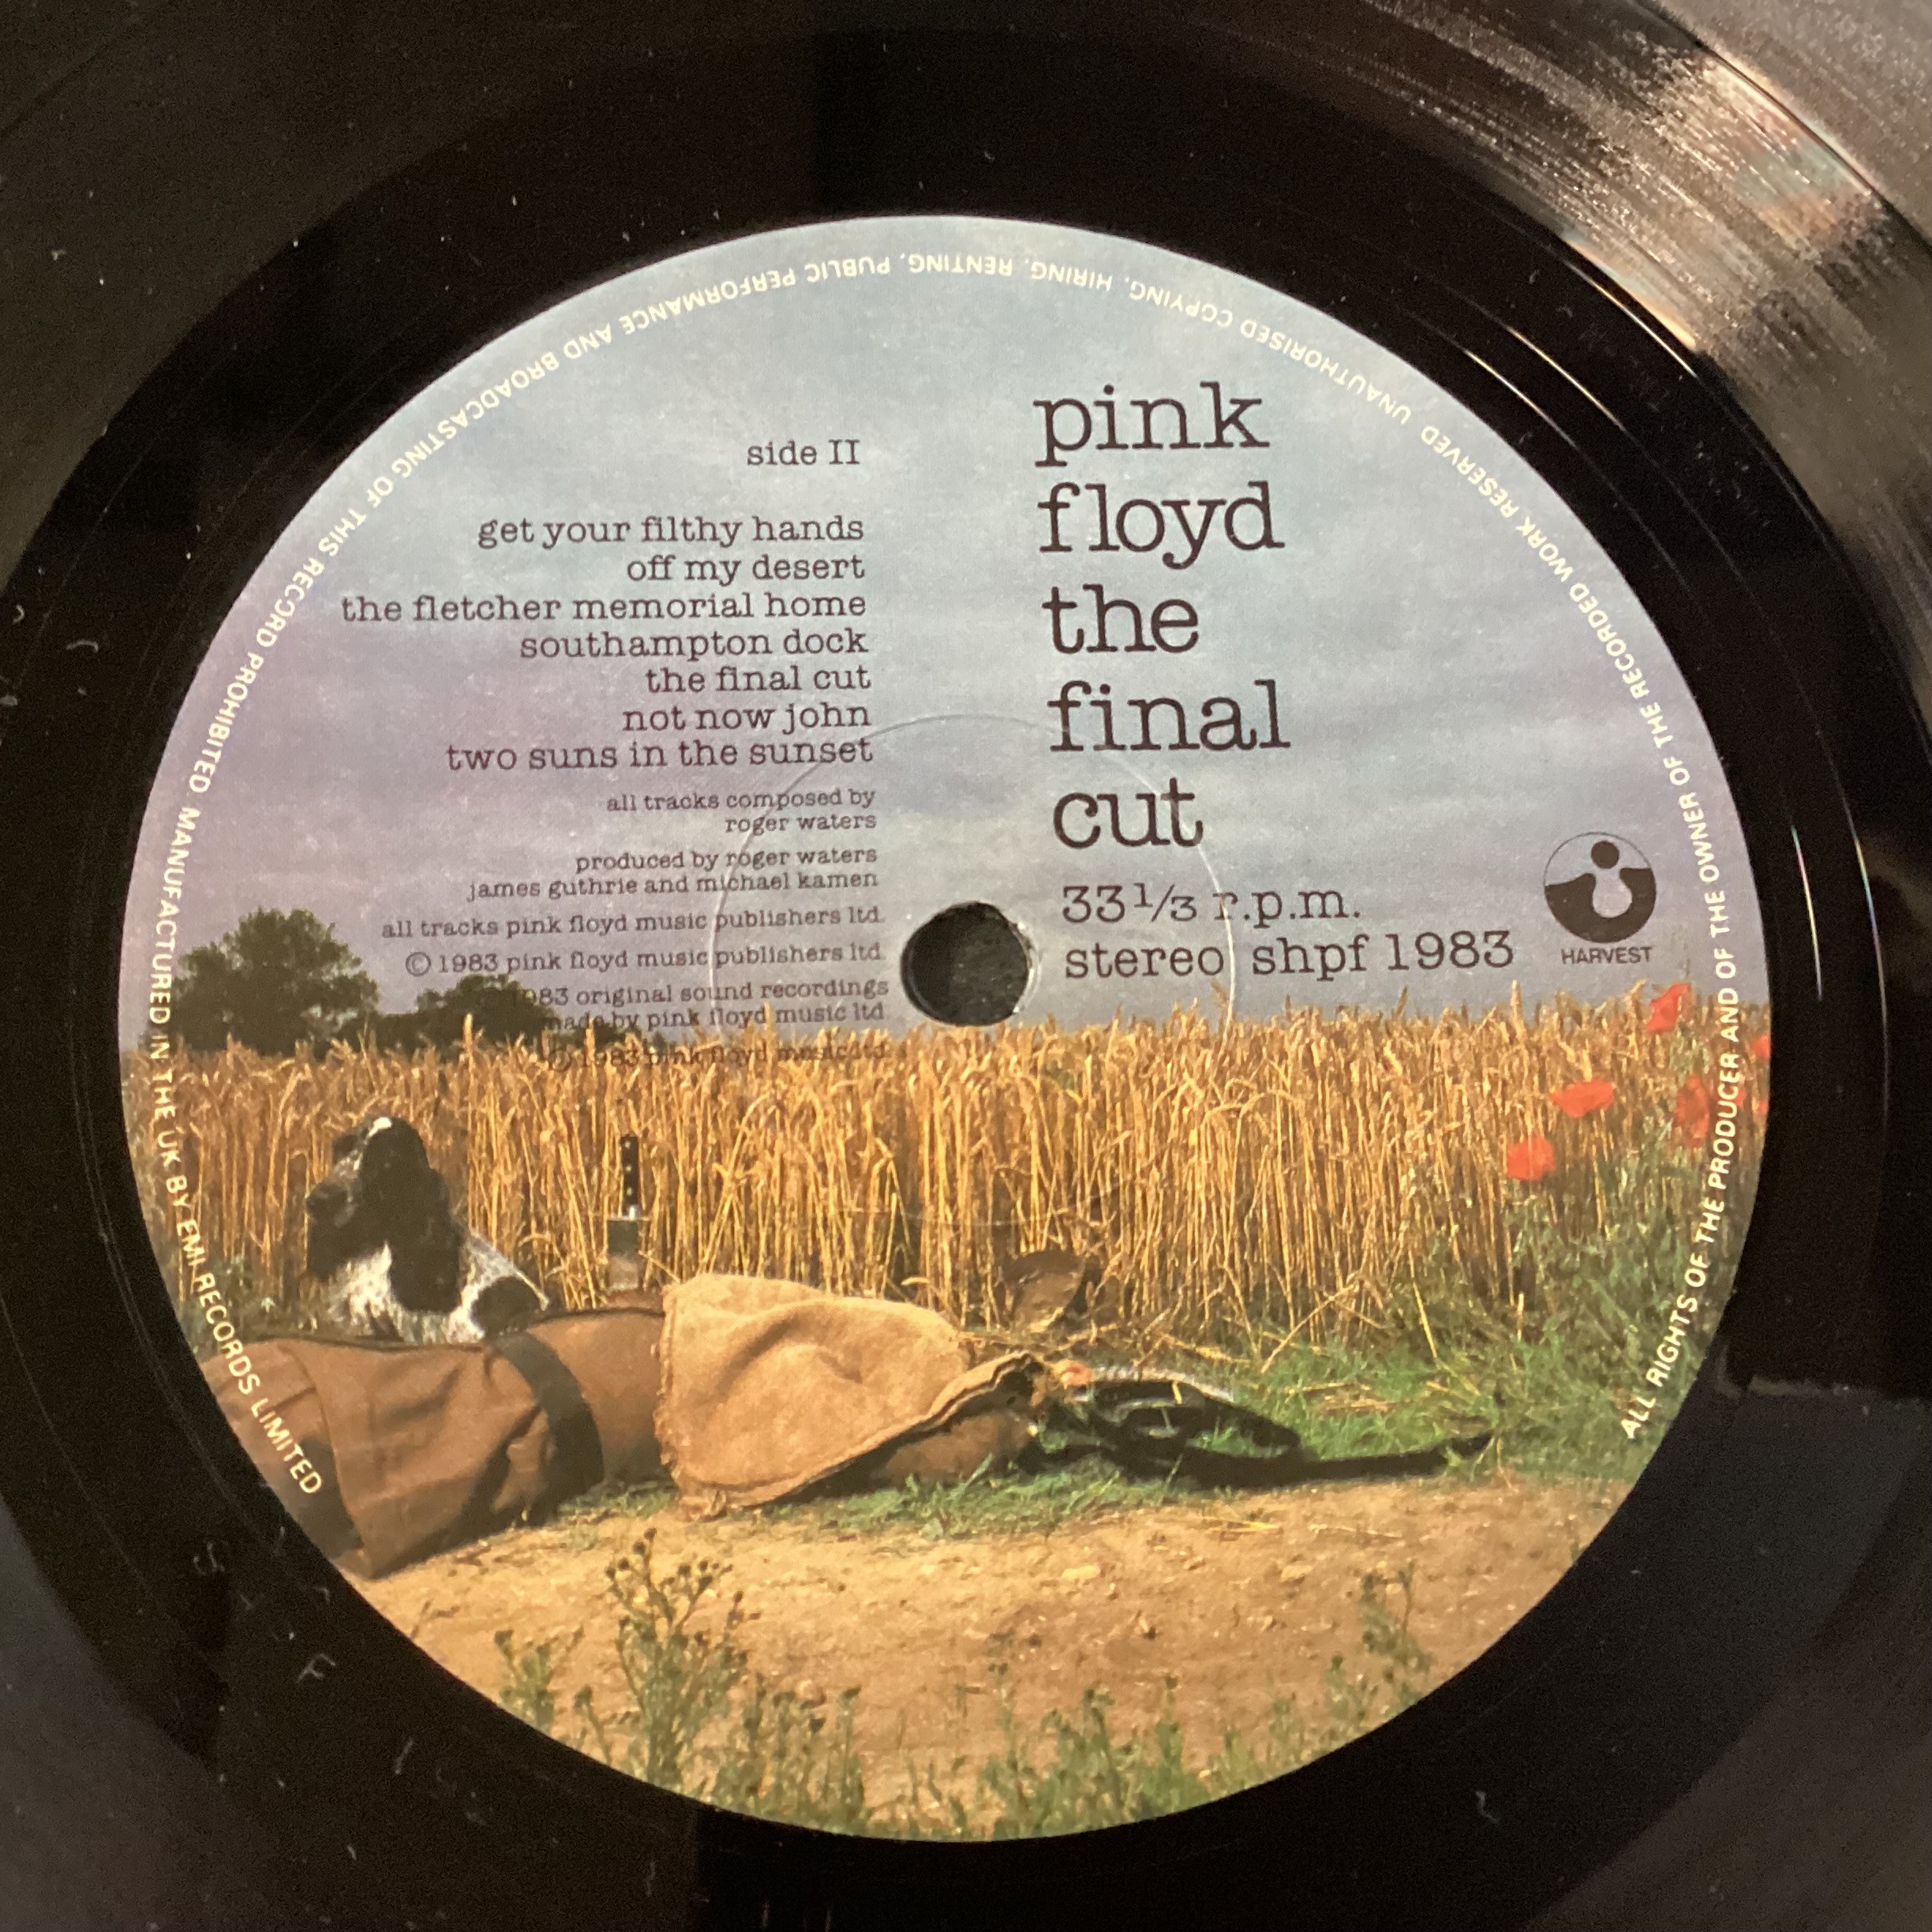 PINK FLOYD VINYL LP RECORDS X 2. Copies here include ‘The Wall’ double album on Harvest SHDW 411 - Bild 8 aus 9